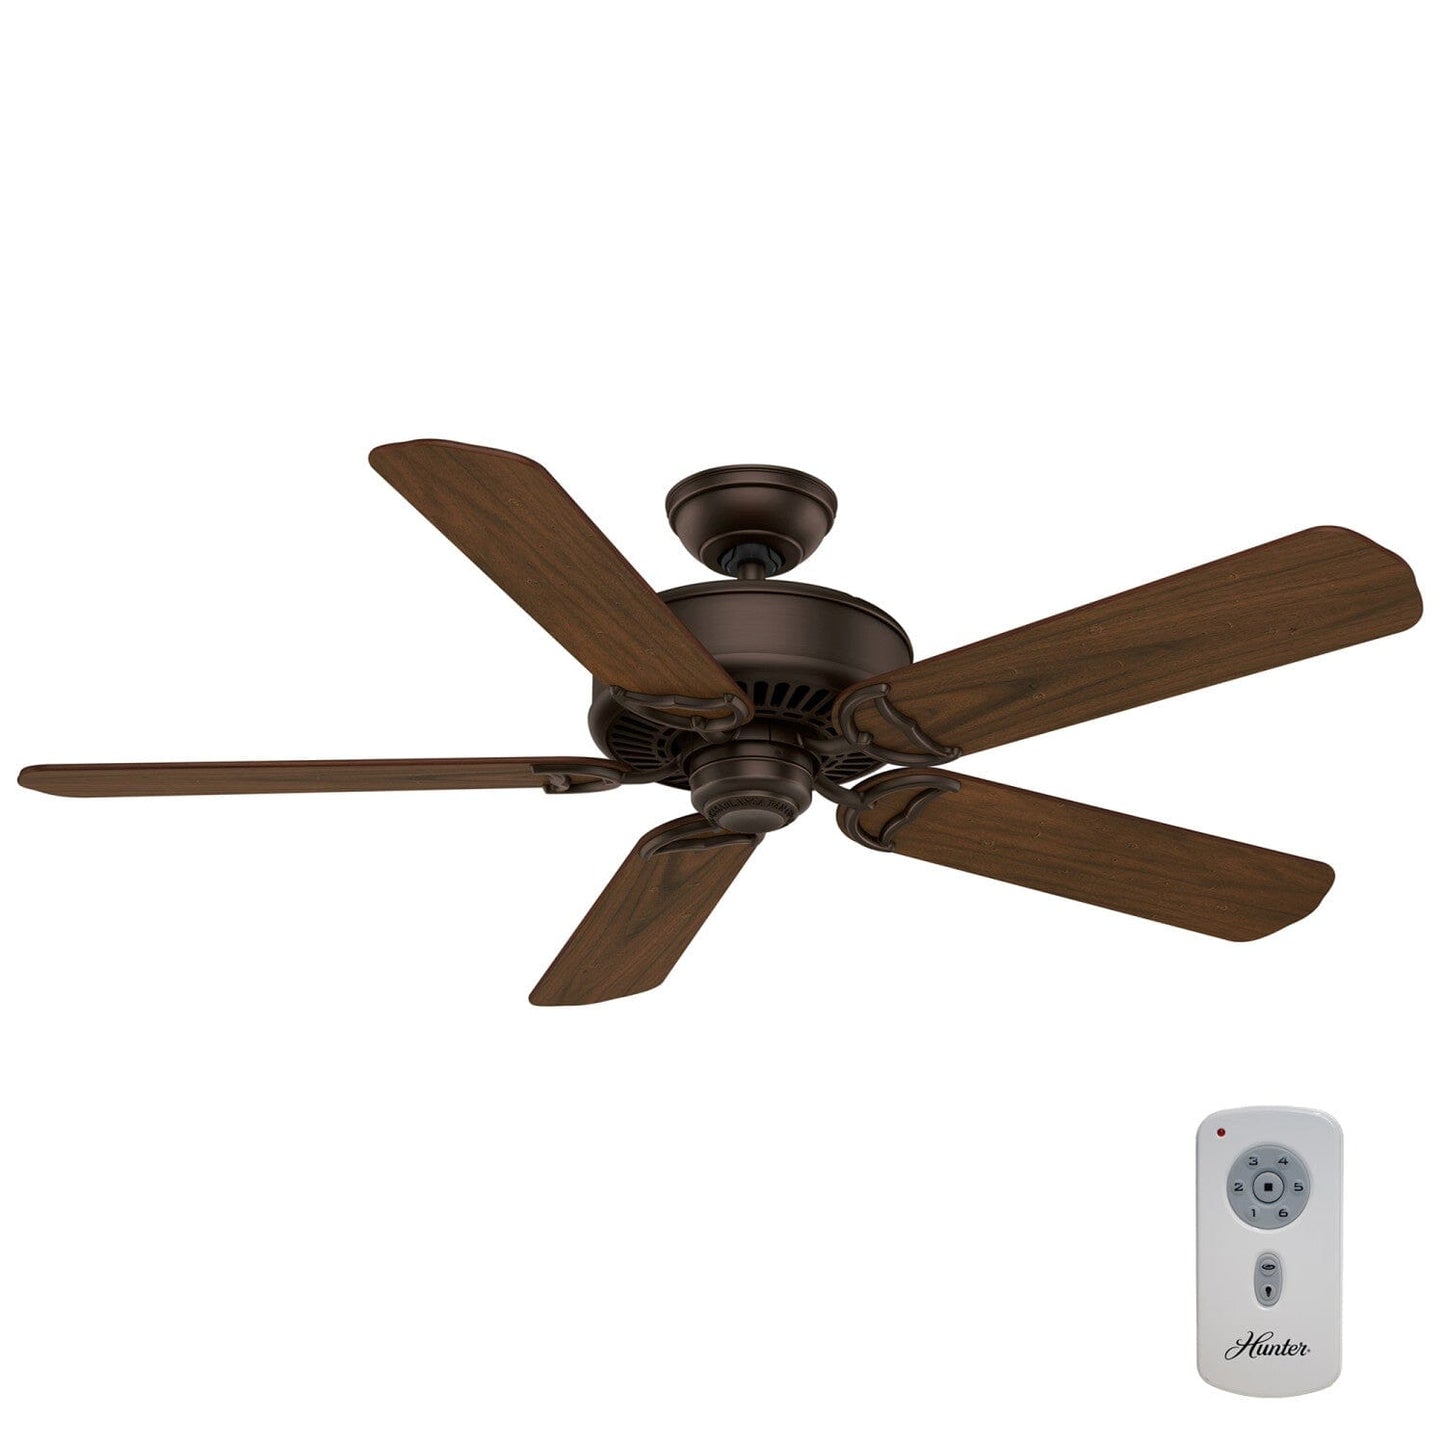 Panama ENERGY STAR DC 54 inch with Remote Ceiling Fans Casablanca Brushed Cocoa - Distressed Walnut 